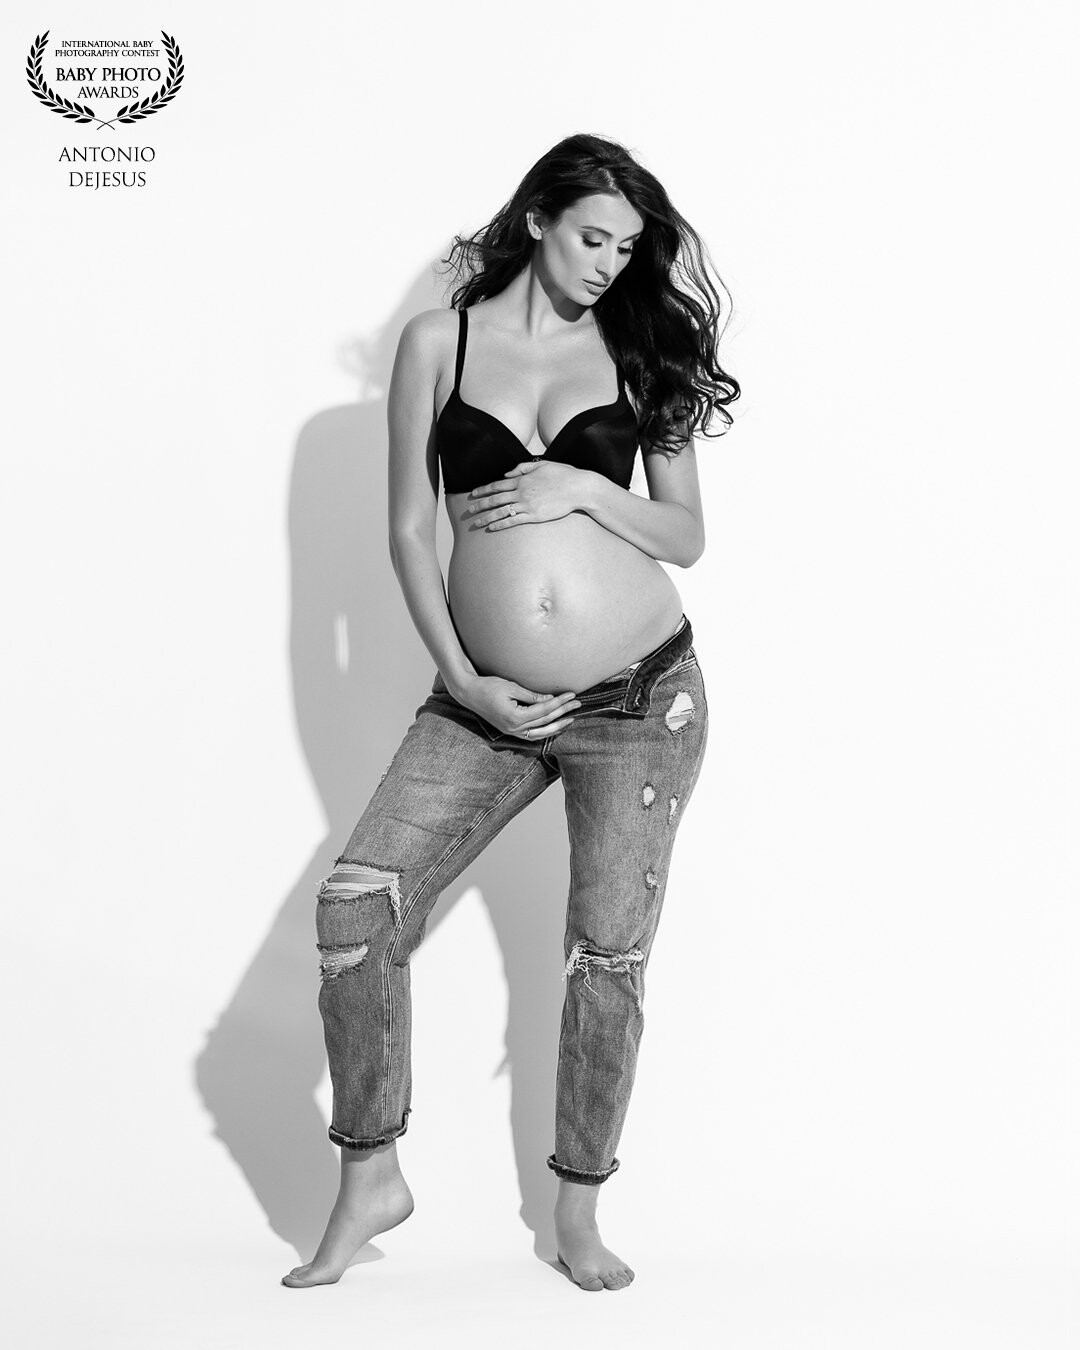 A mother expecting her second baby boy with an editorial high-key look! The black brazier and designer jeans is a great way to showcase the beauty can be casual.